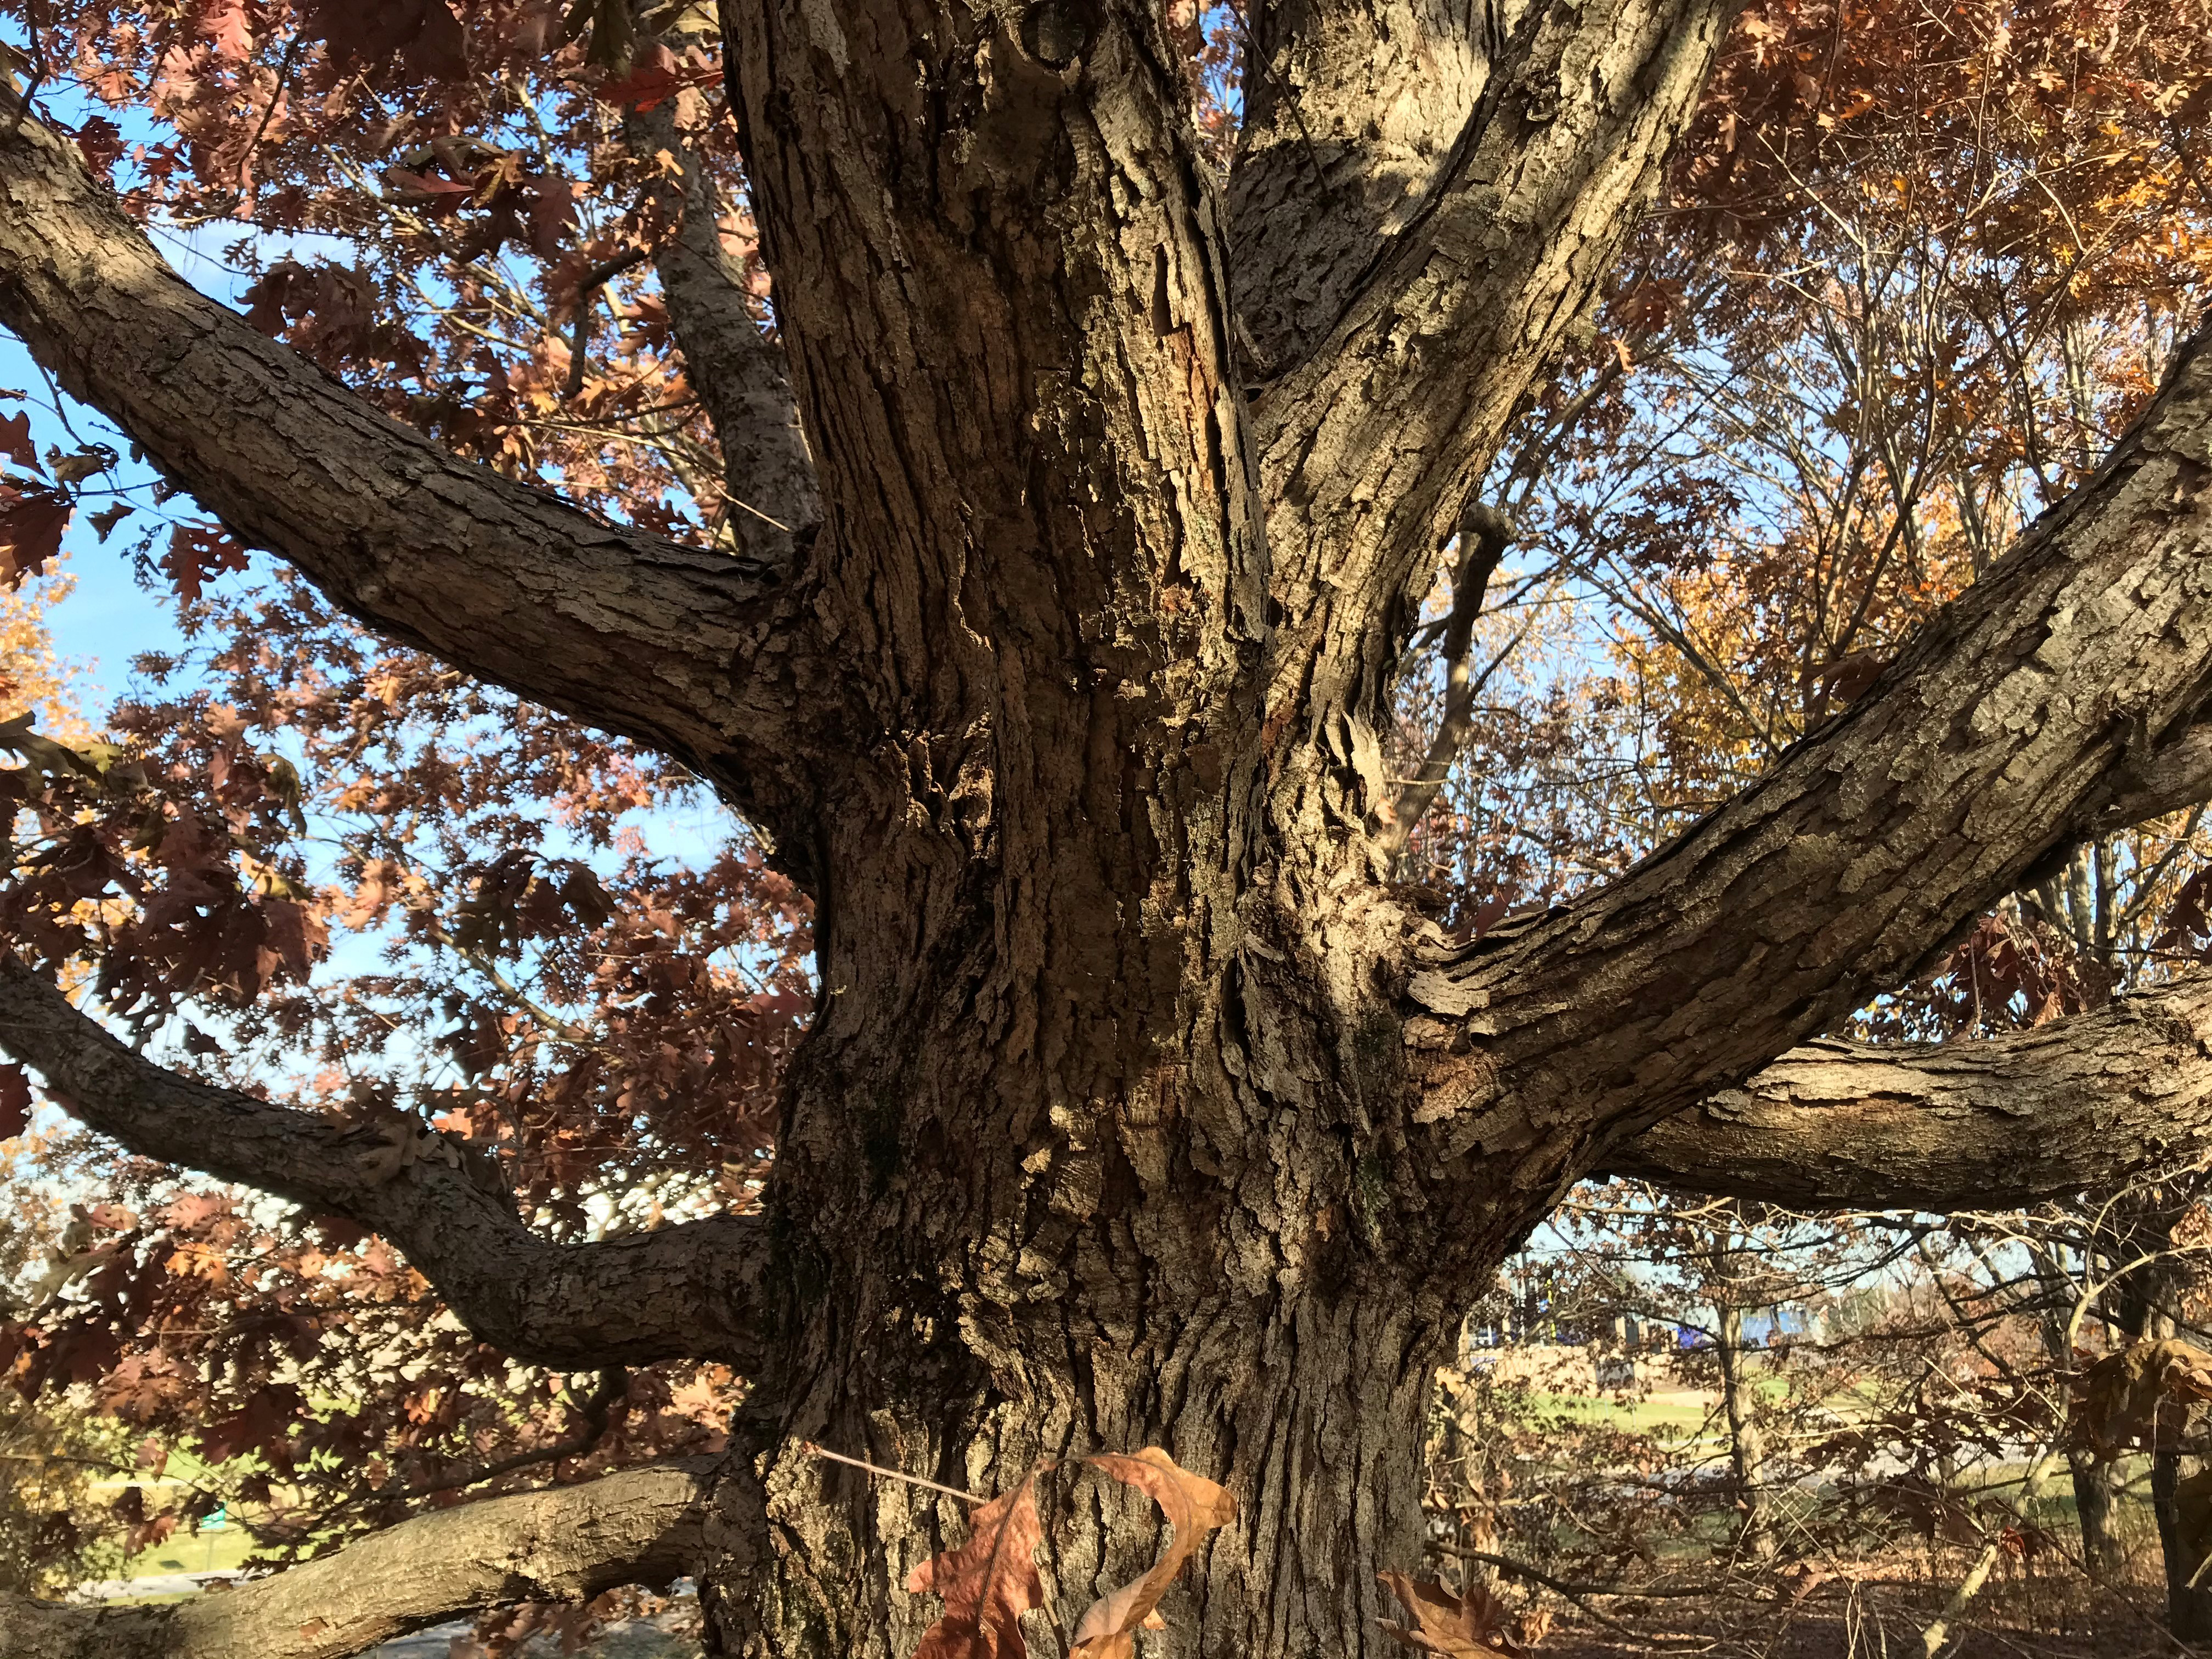 Showing the bark of Quercus bicolor, or the swamp white oak. The tree can be found on the Walk Across Kentucky at The Arboretum. Photo provided by Emily Ellingson